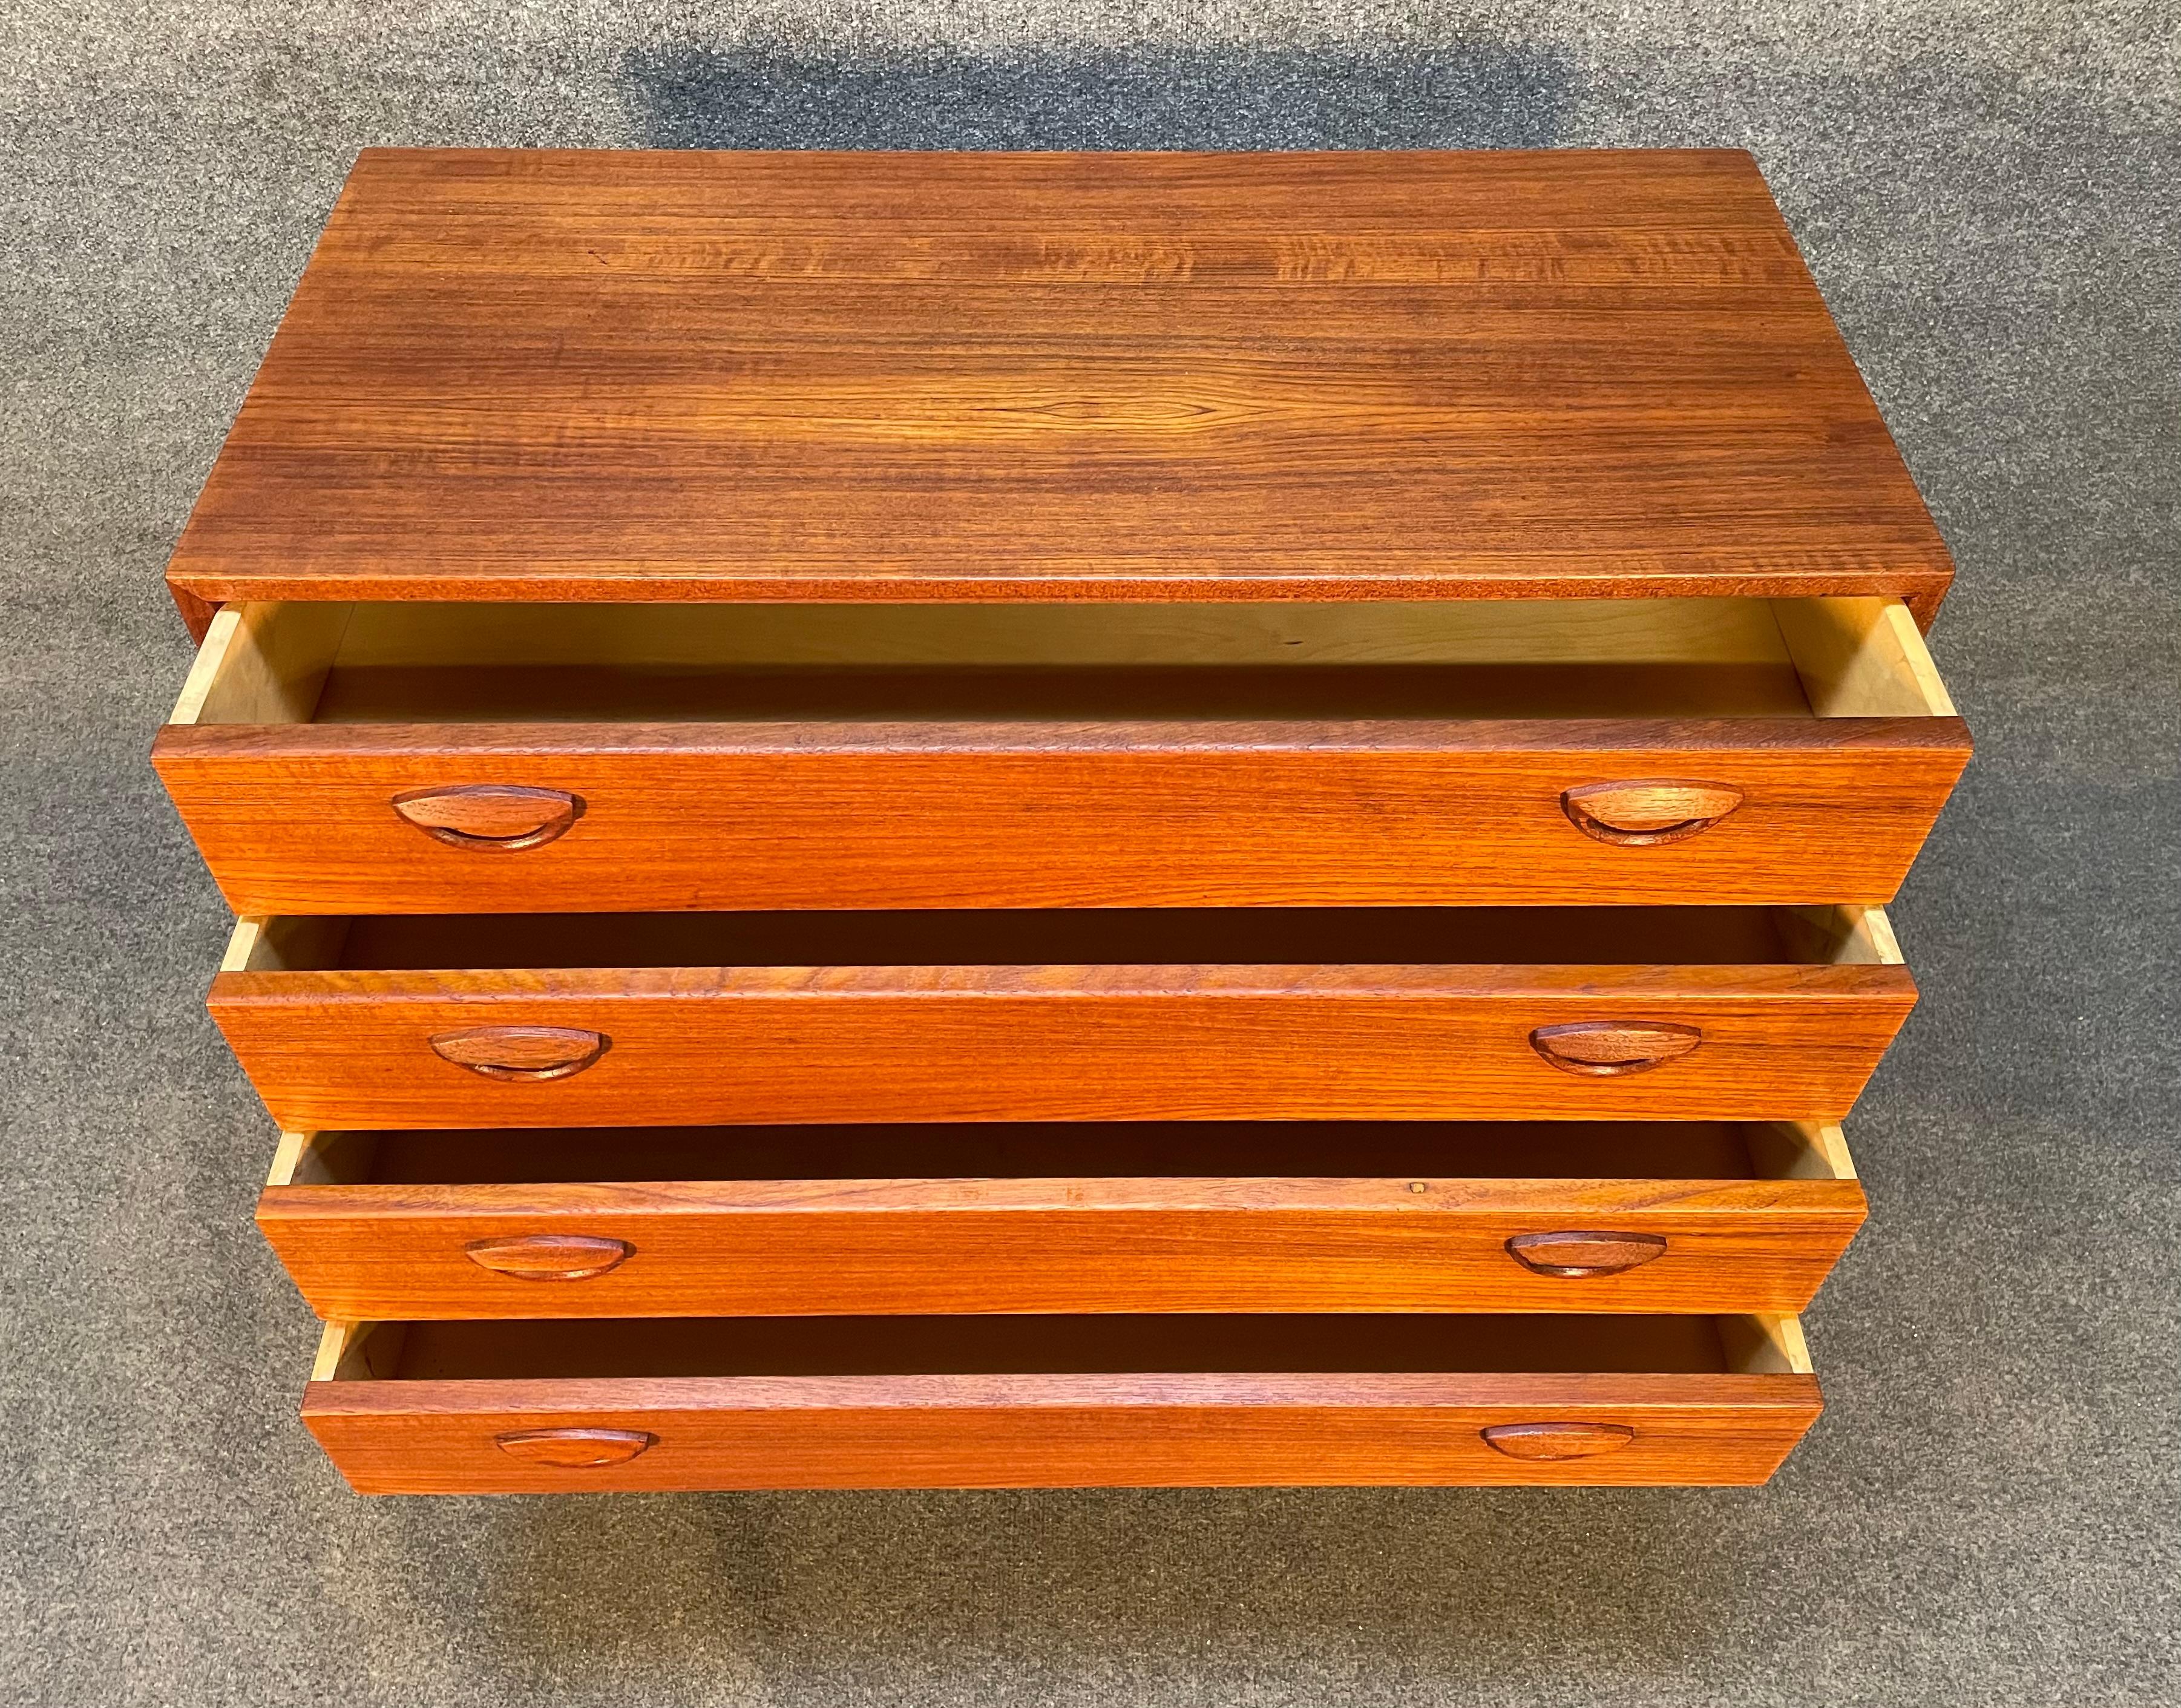 Here is a beautiful Scandinavian modern chest of drawers in teak designed by Kai Kristiansen and manufactured by Feldballes Mobelfabrik in Denmark in the 1960's.
This exquisite case piece, recently imported from Europe to California before its